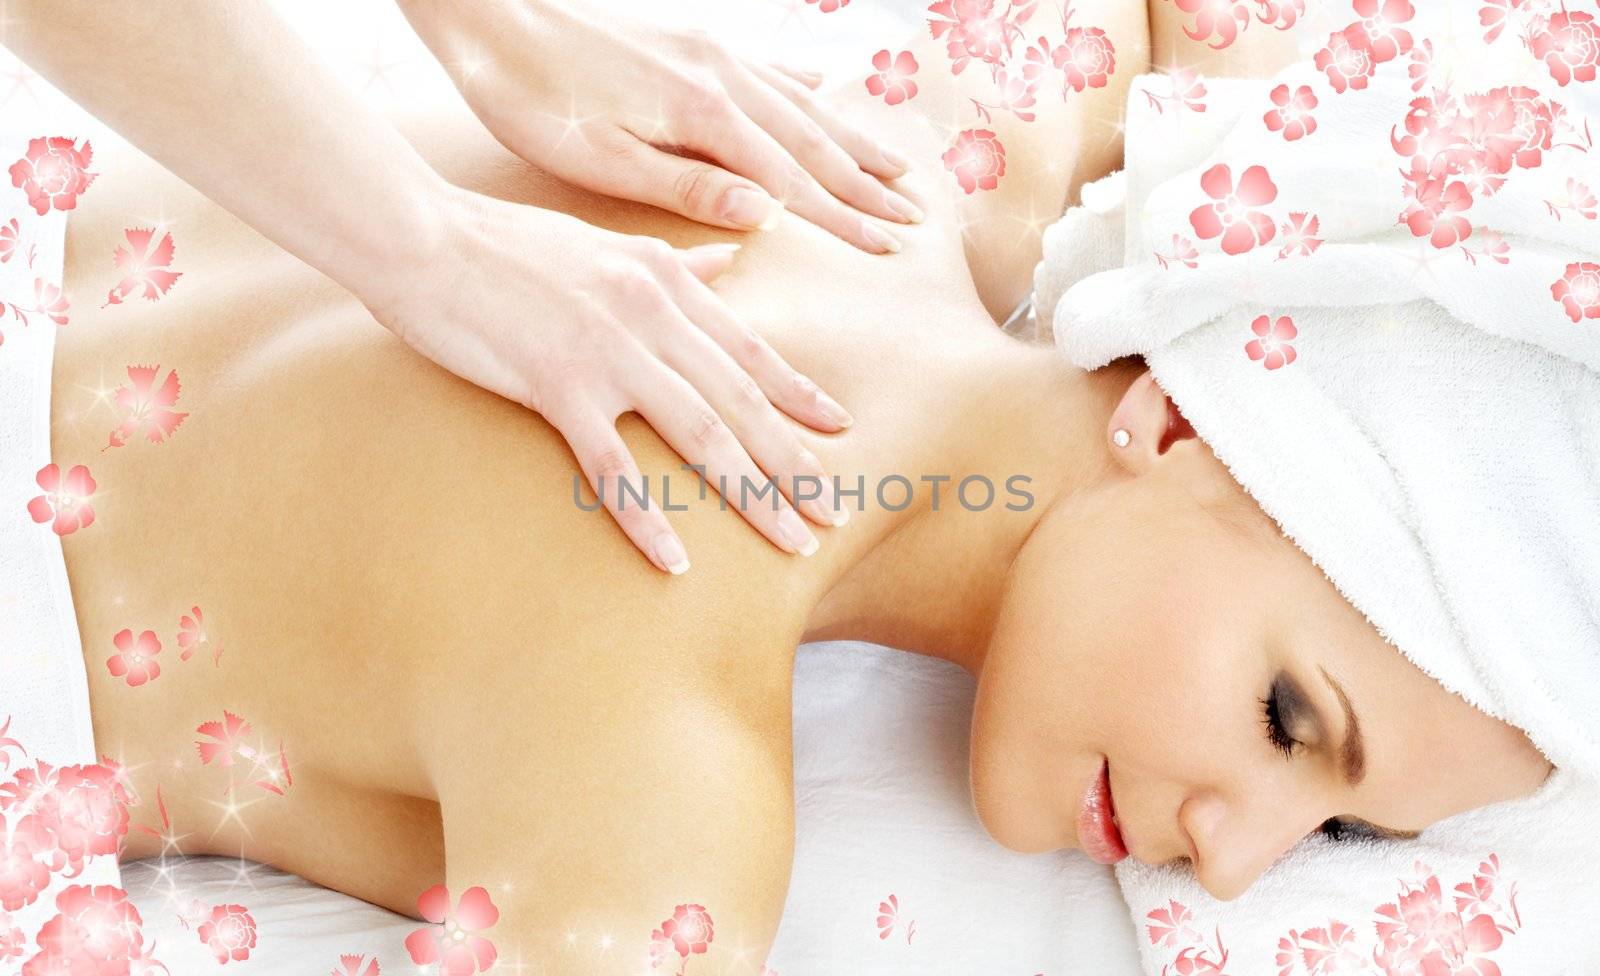 professional massage with flowers #2 by dolgachov